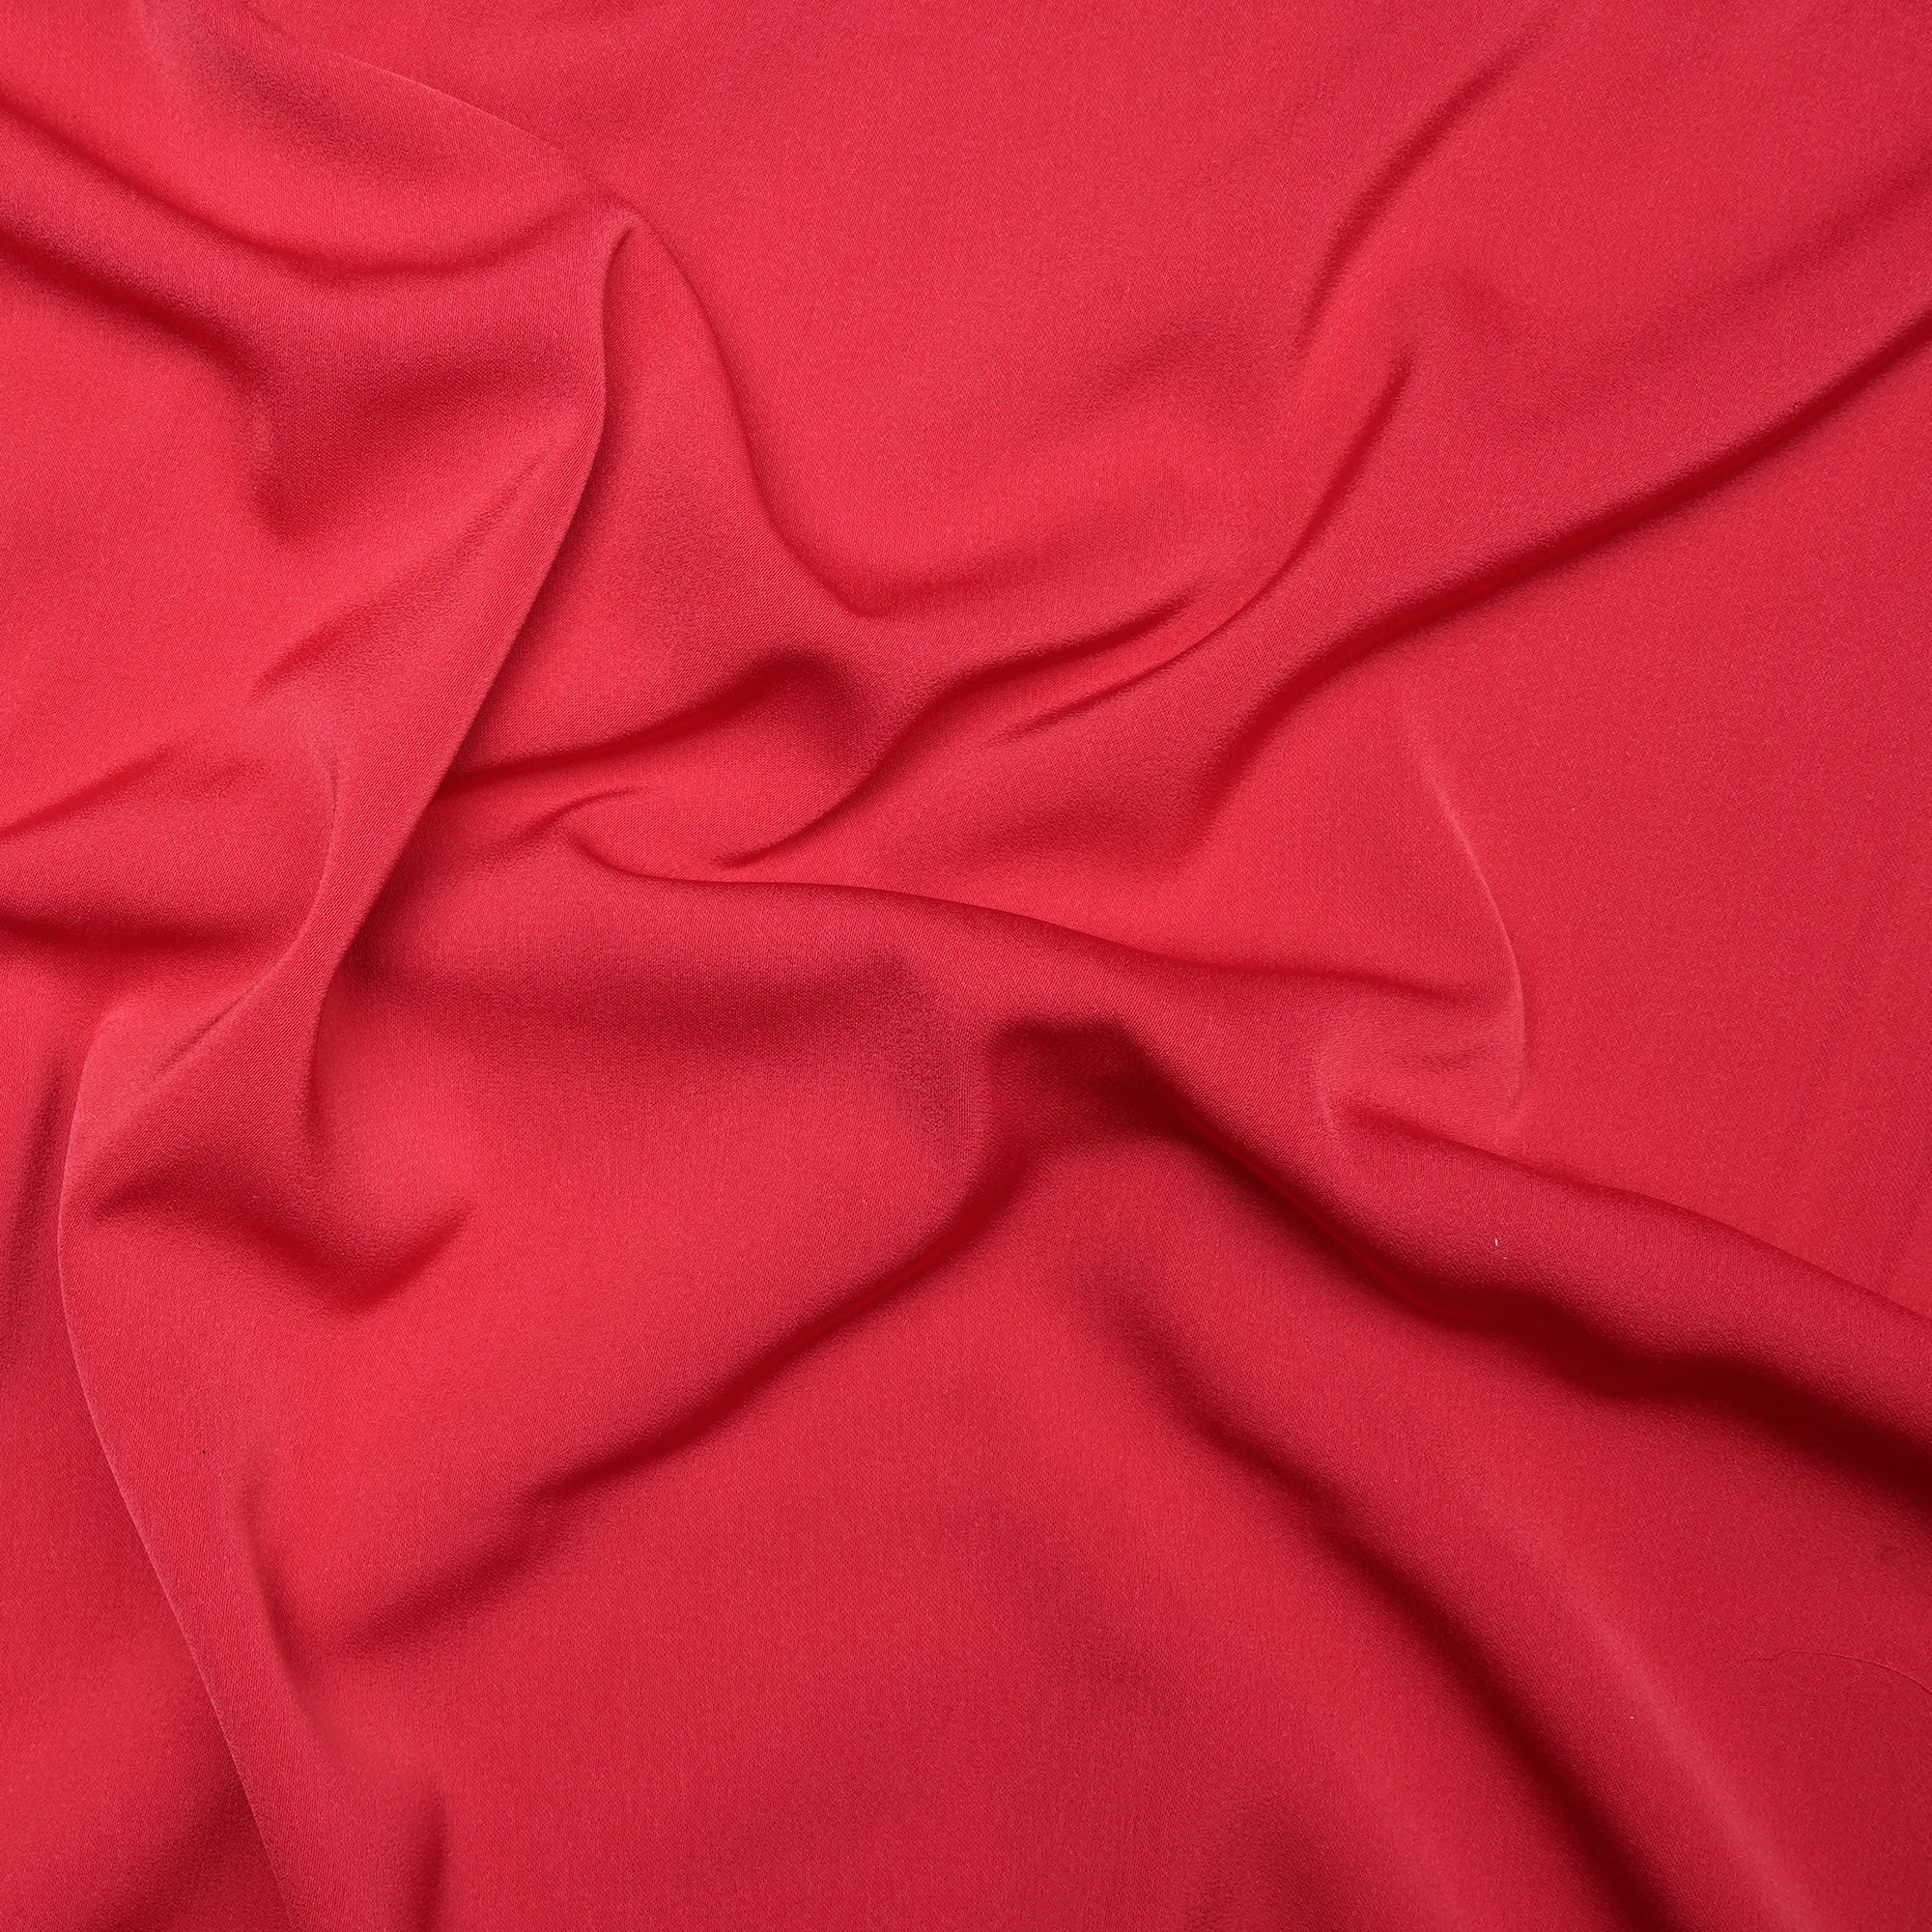 Watermelon Solid Dyed Imported Prada Crepe Fabric (60" Width)